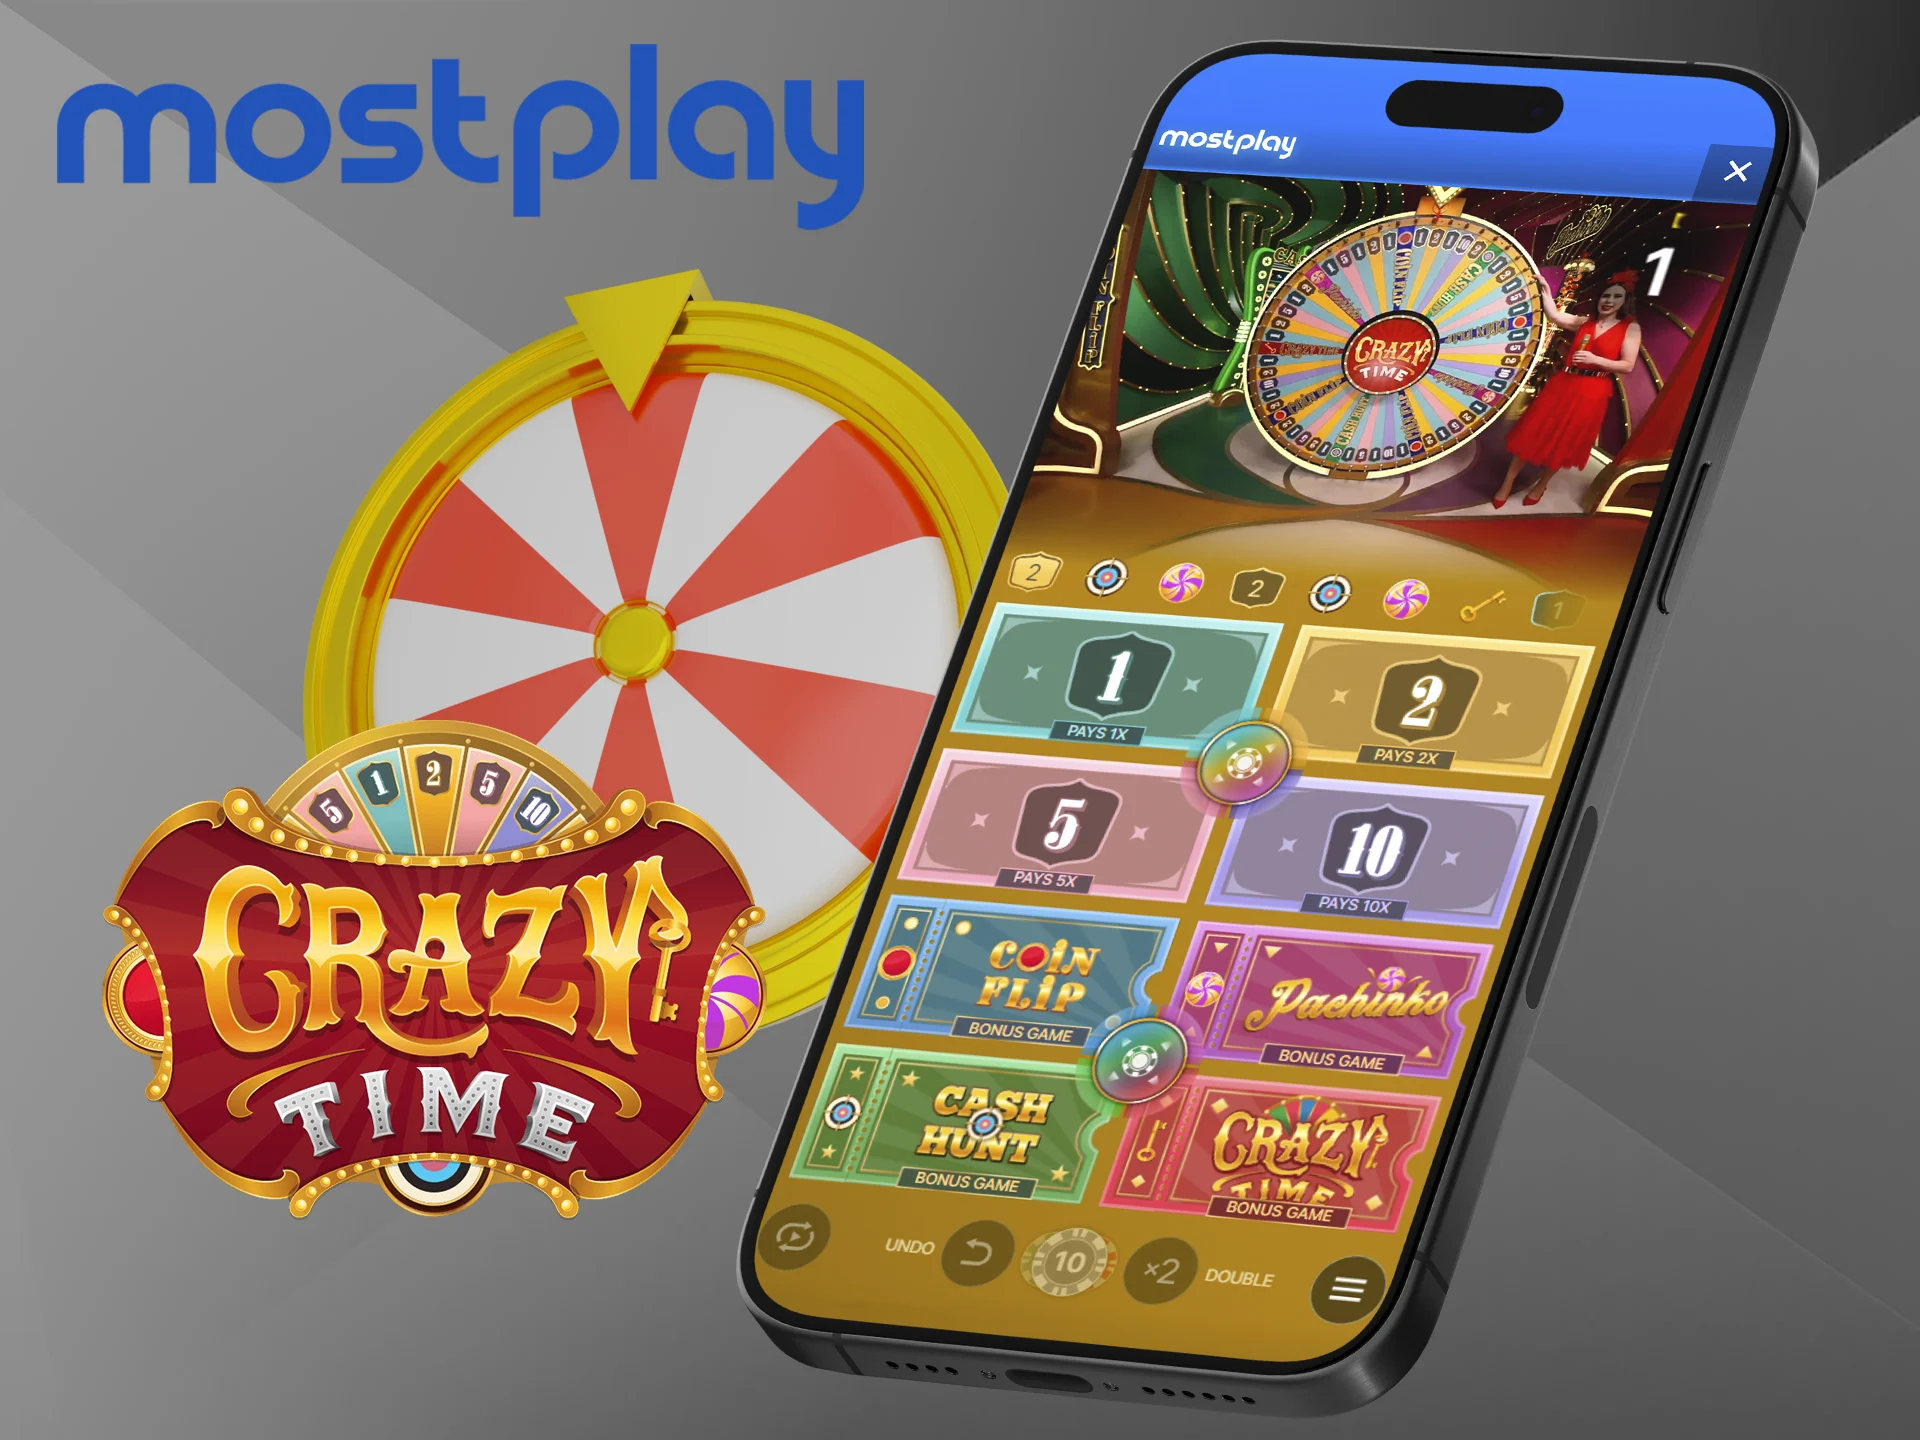 Have fun with Crazy Time at Mostplay.